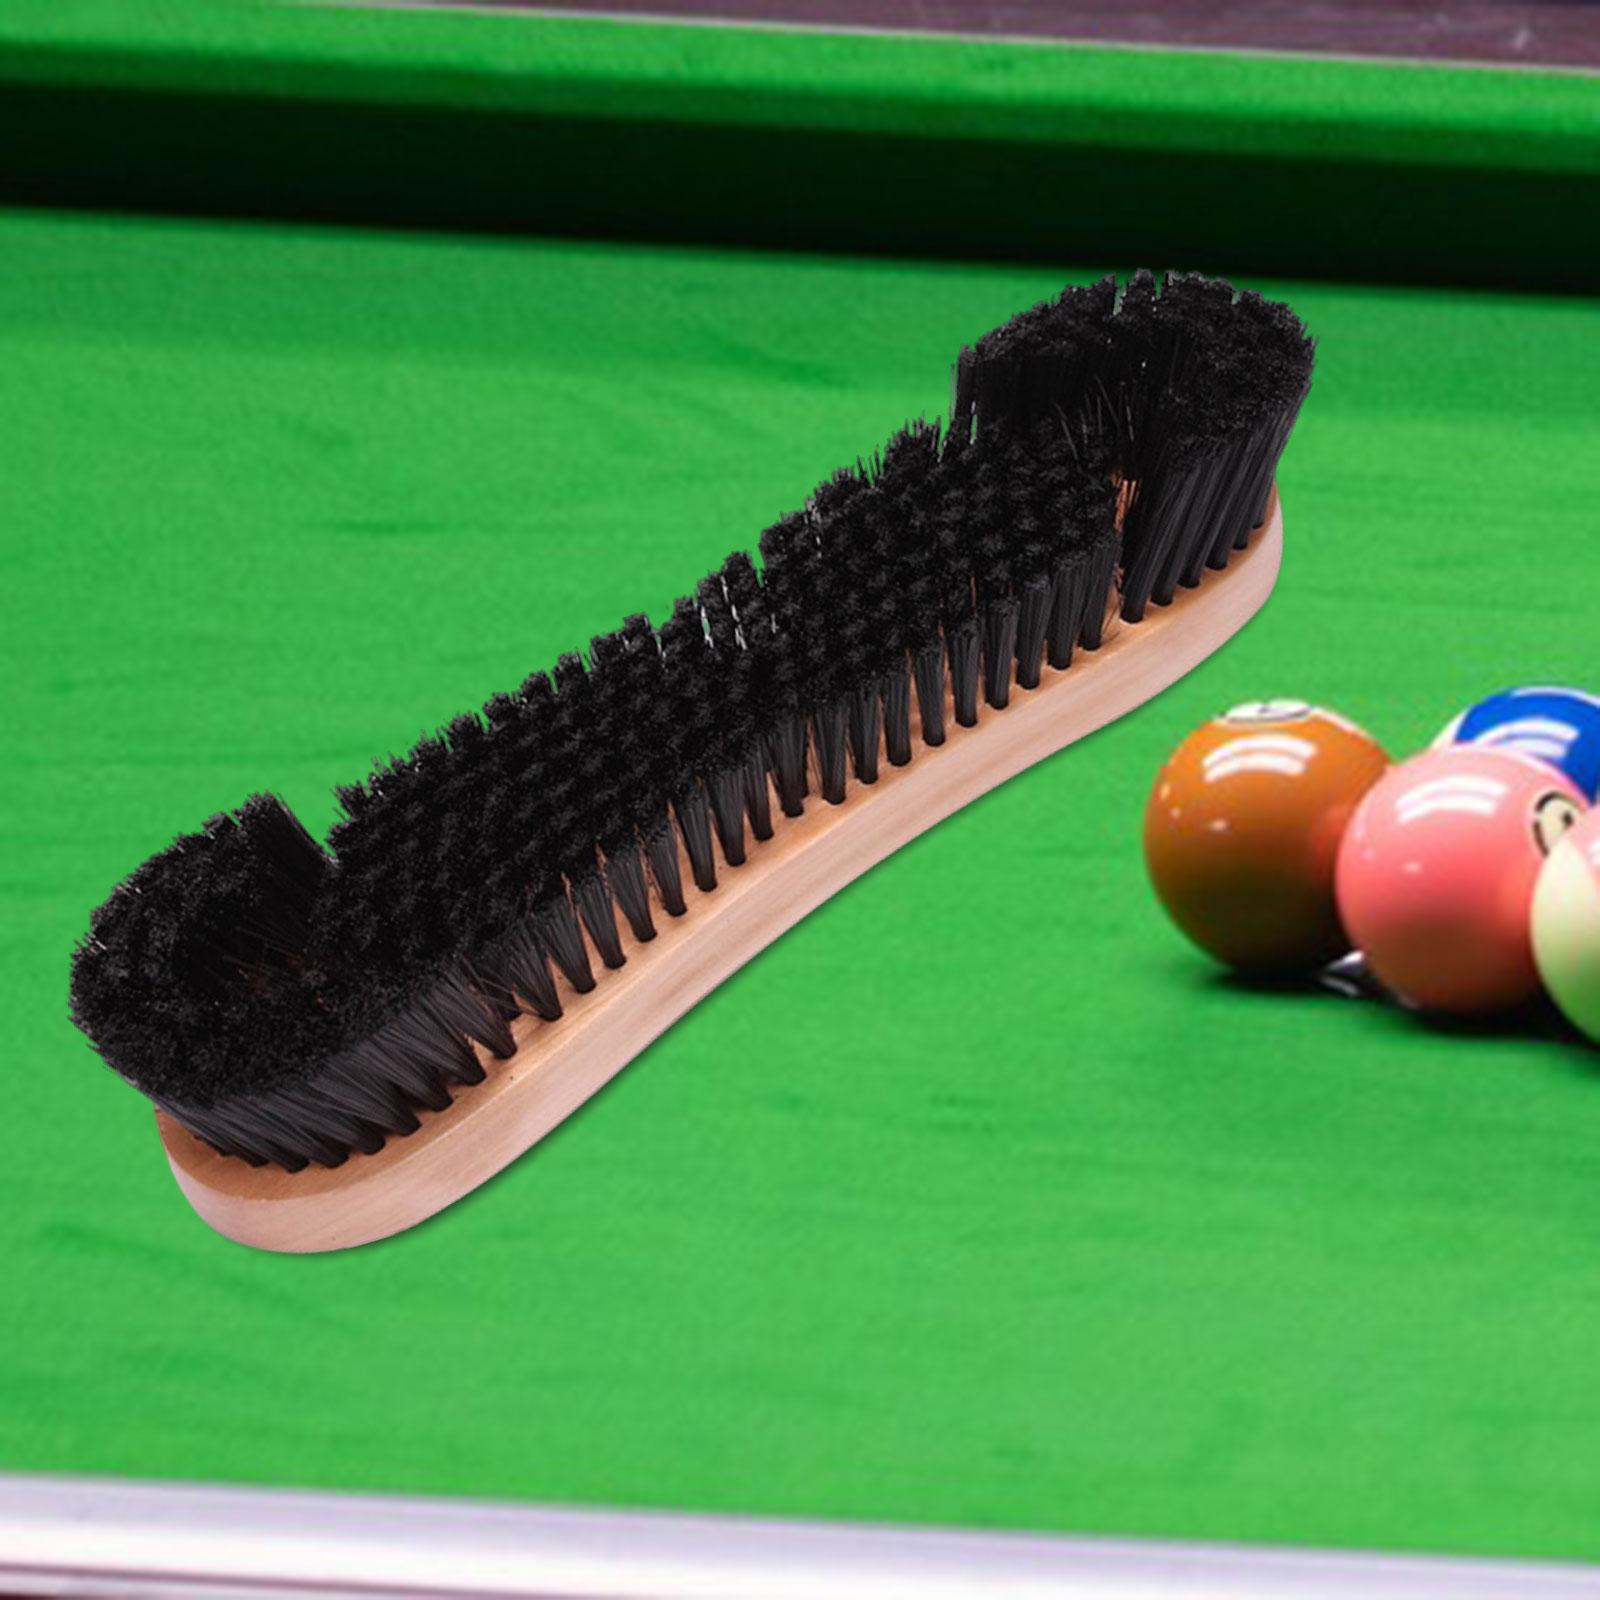 Billiard Pool Table Brush Durable Pool Table Cleaner Portable Cleaning Brush 22CM